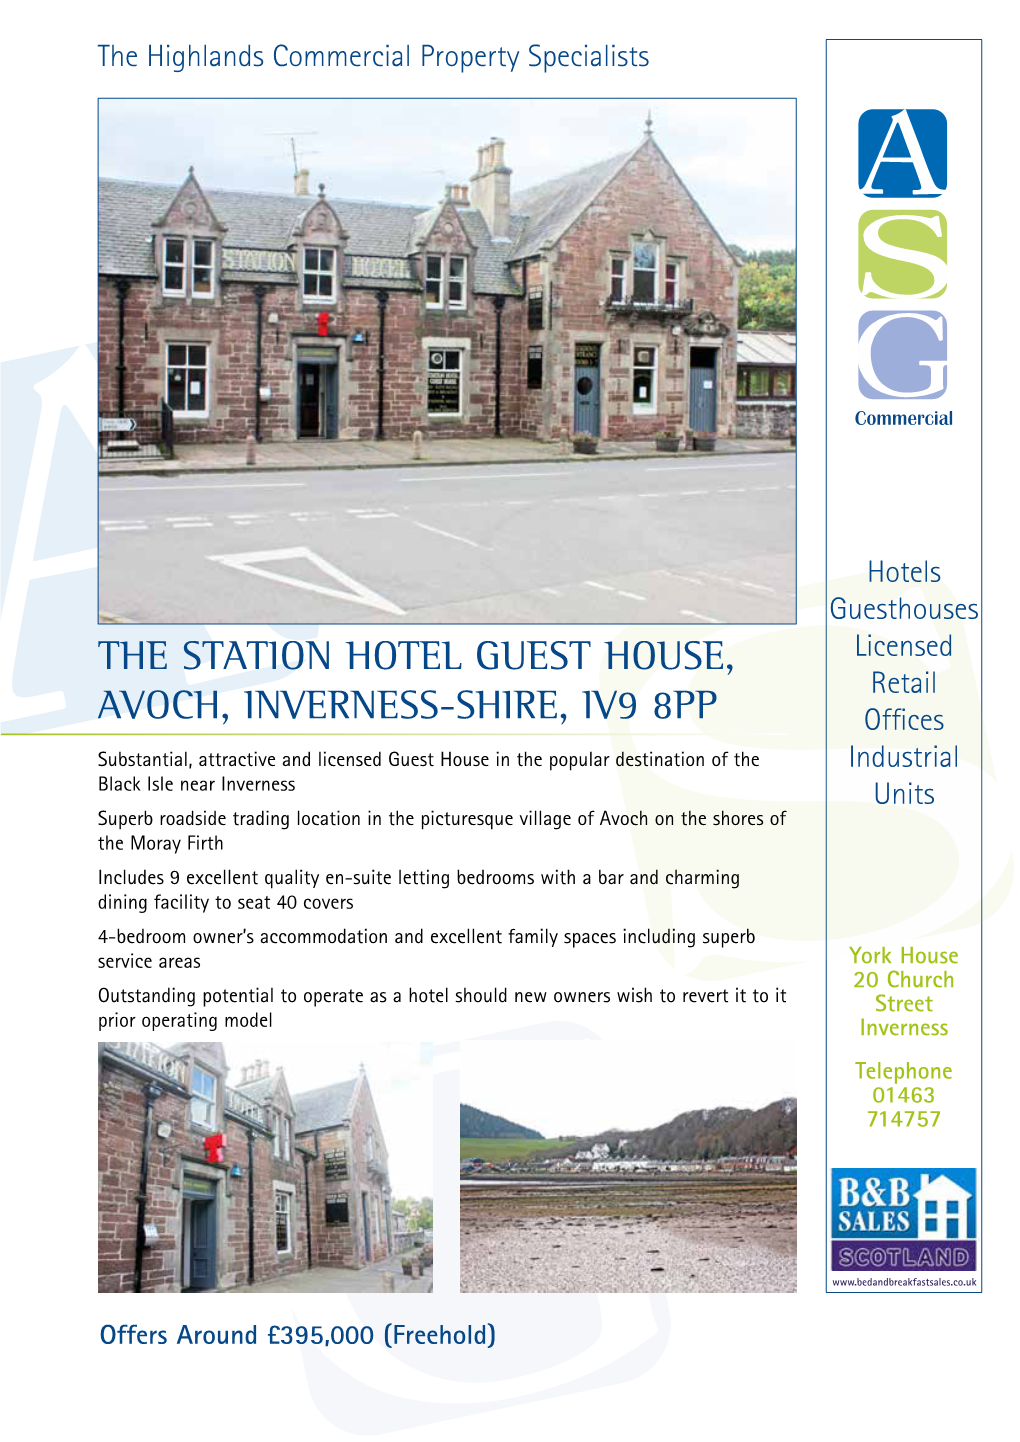 The Station Hotel Guest House, Avoch, Inverness